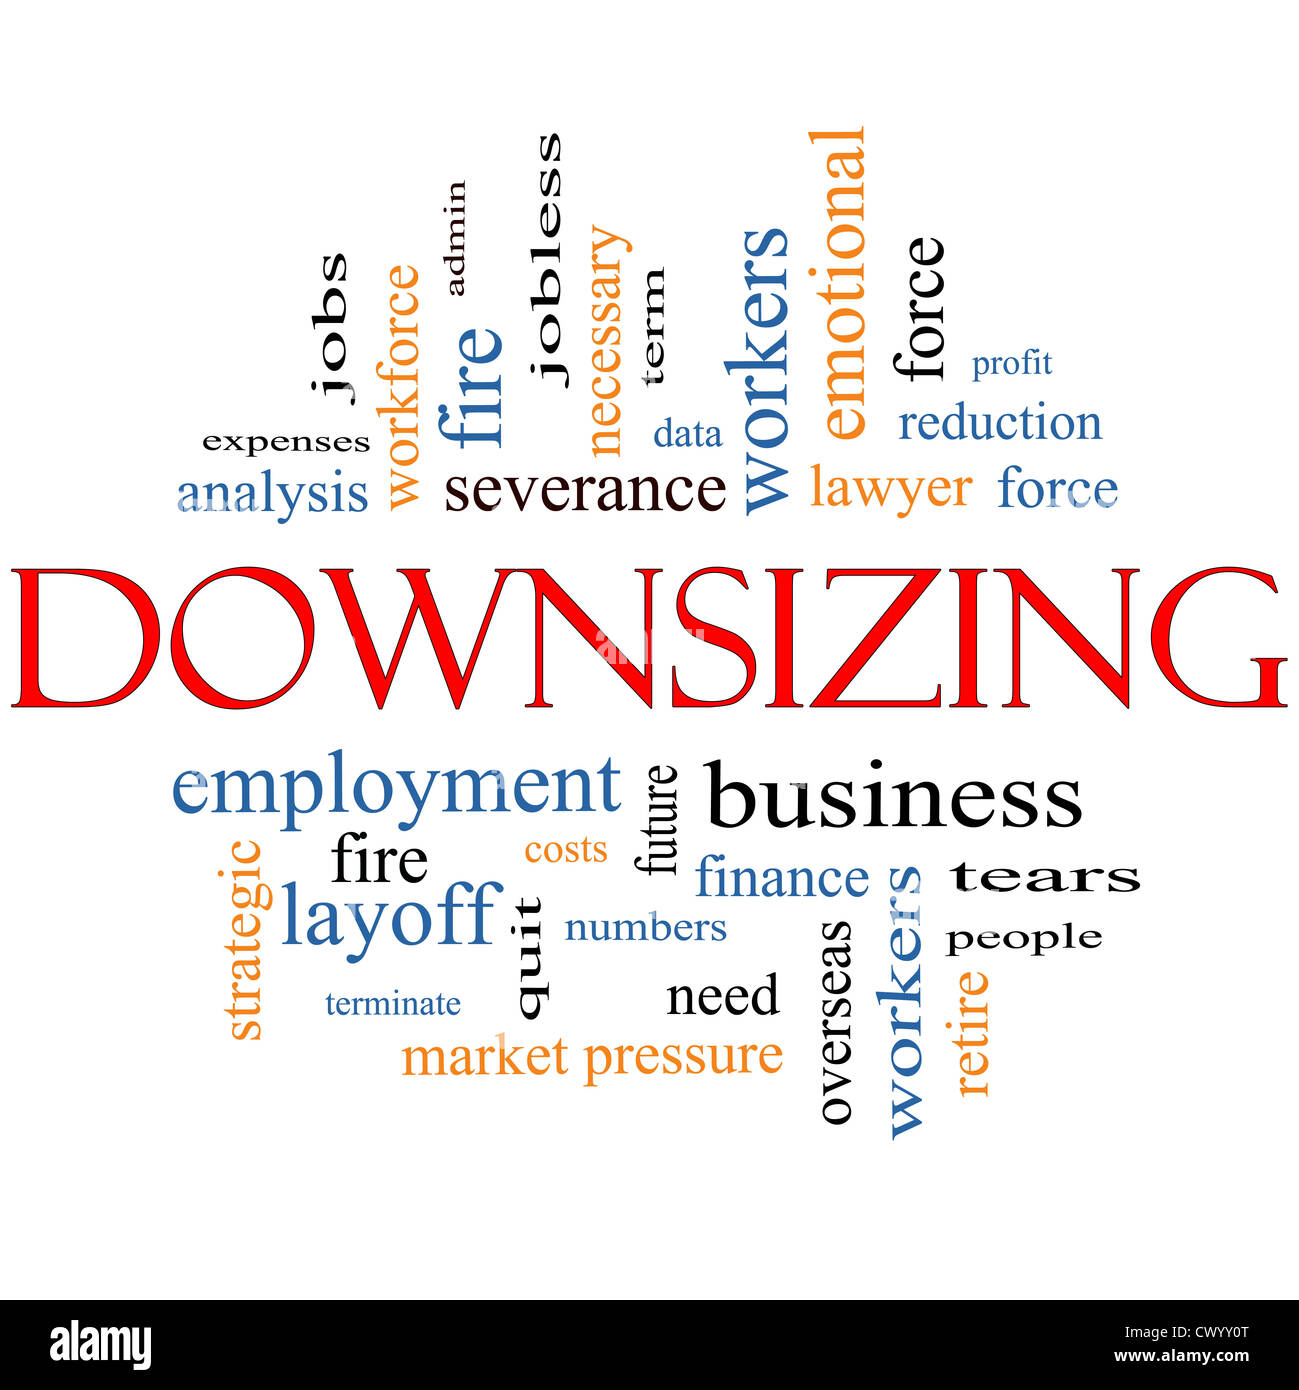 Downsizing Word Cloud Concept with great terms such as fire, layoff, terminate, severance and more. Stock Photo